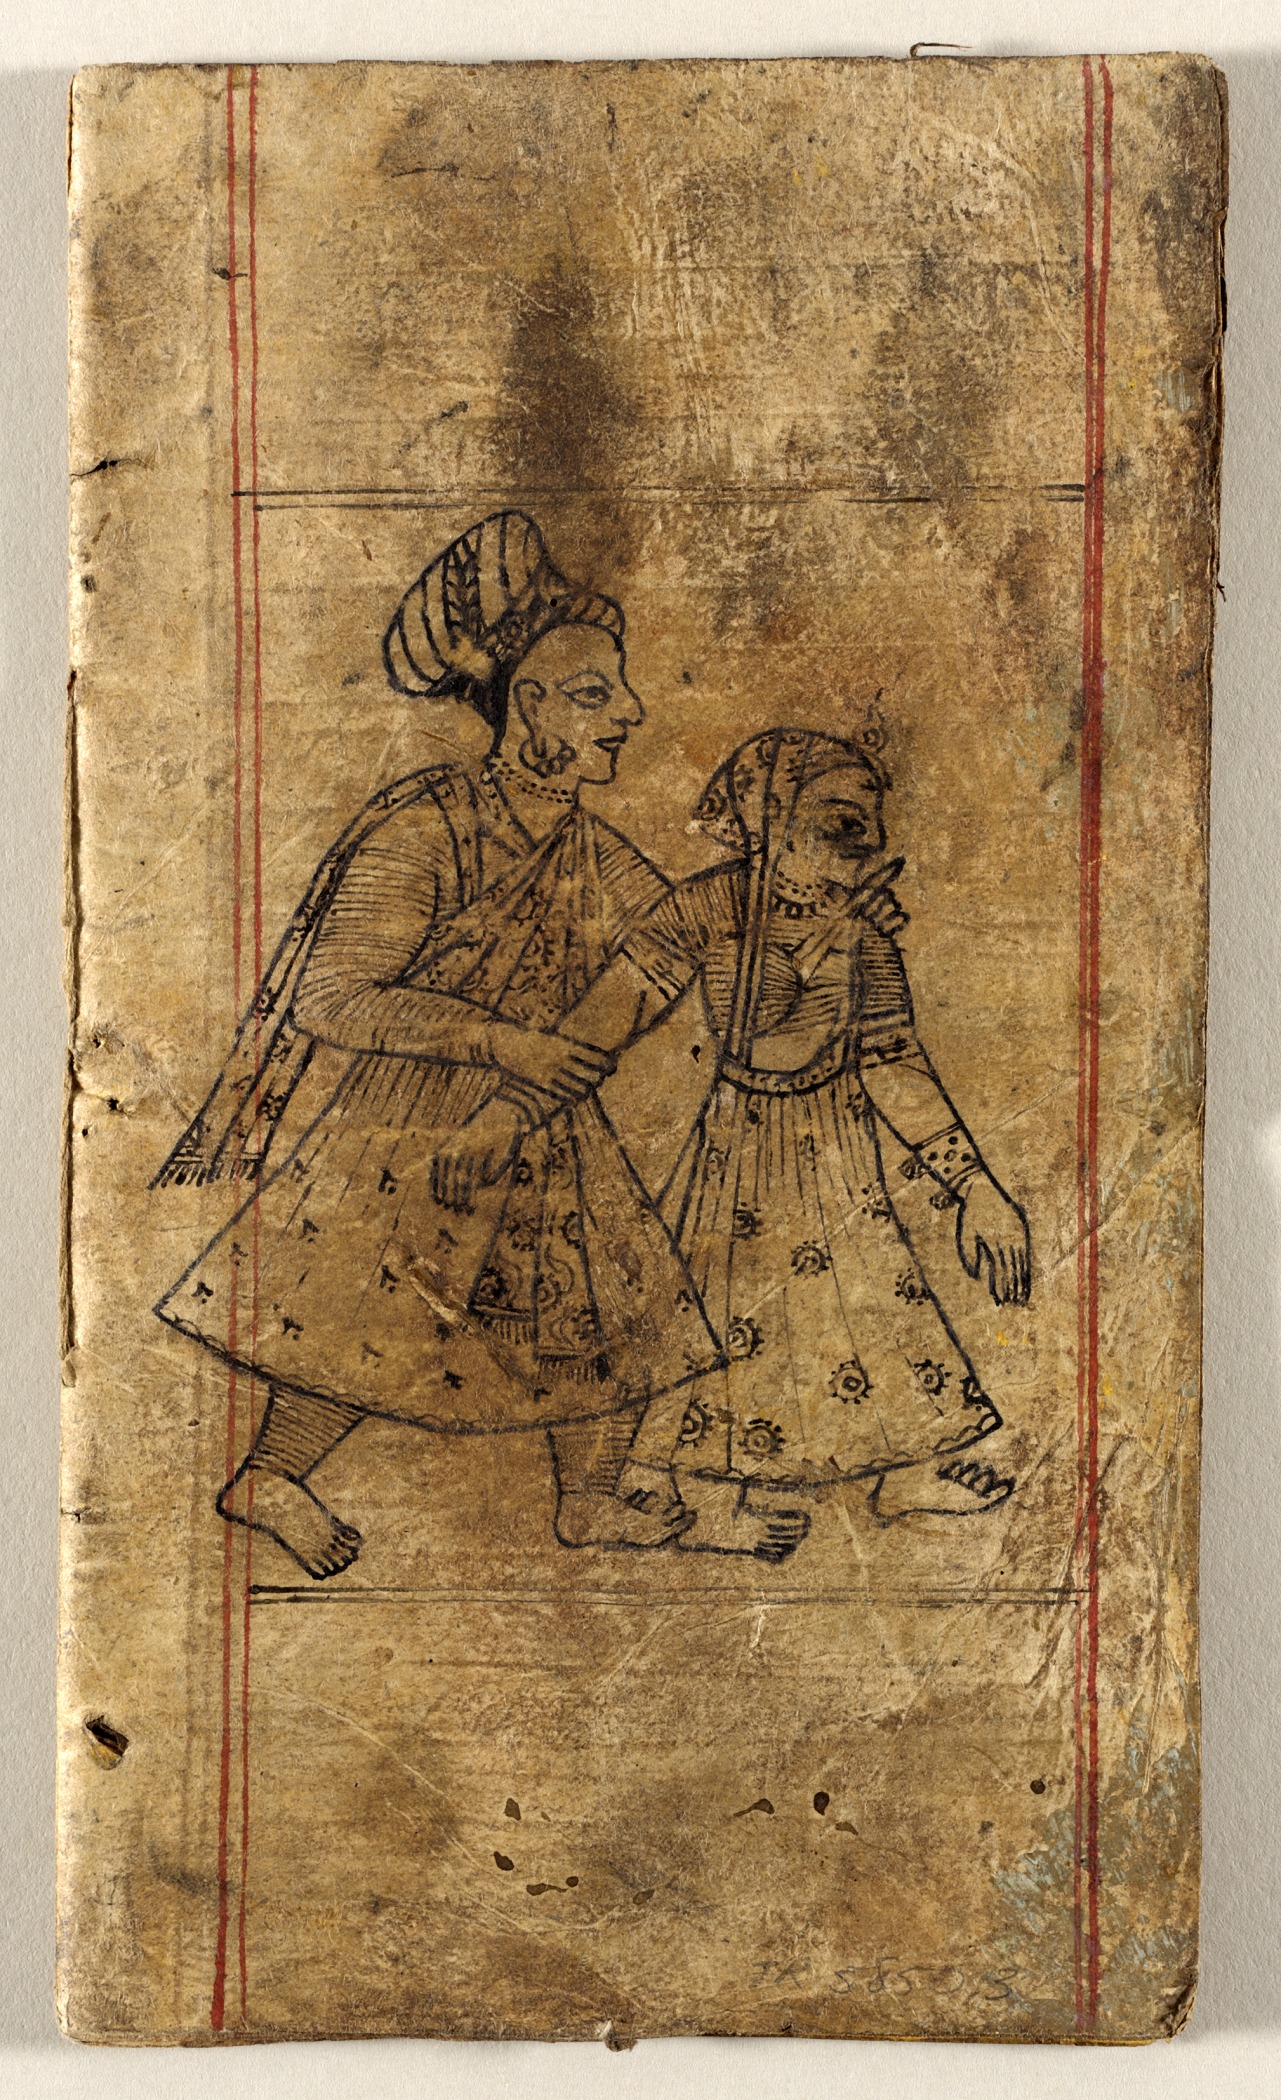 a drawing on a brown paper shows a man walking and a woman walking behind